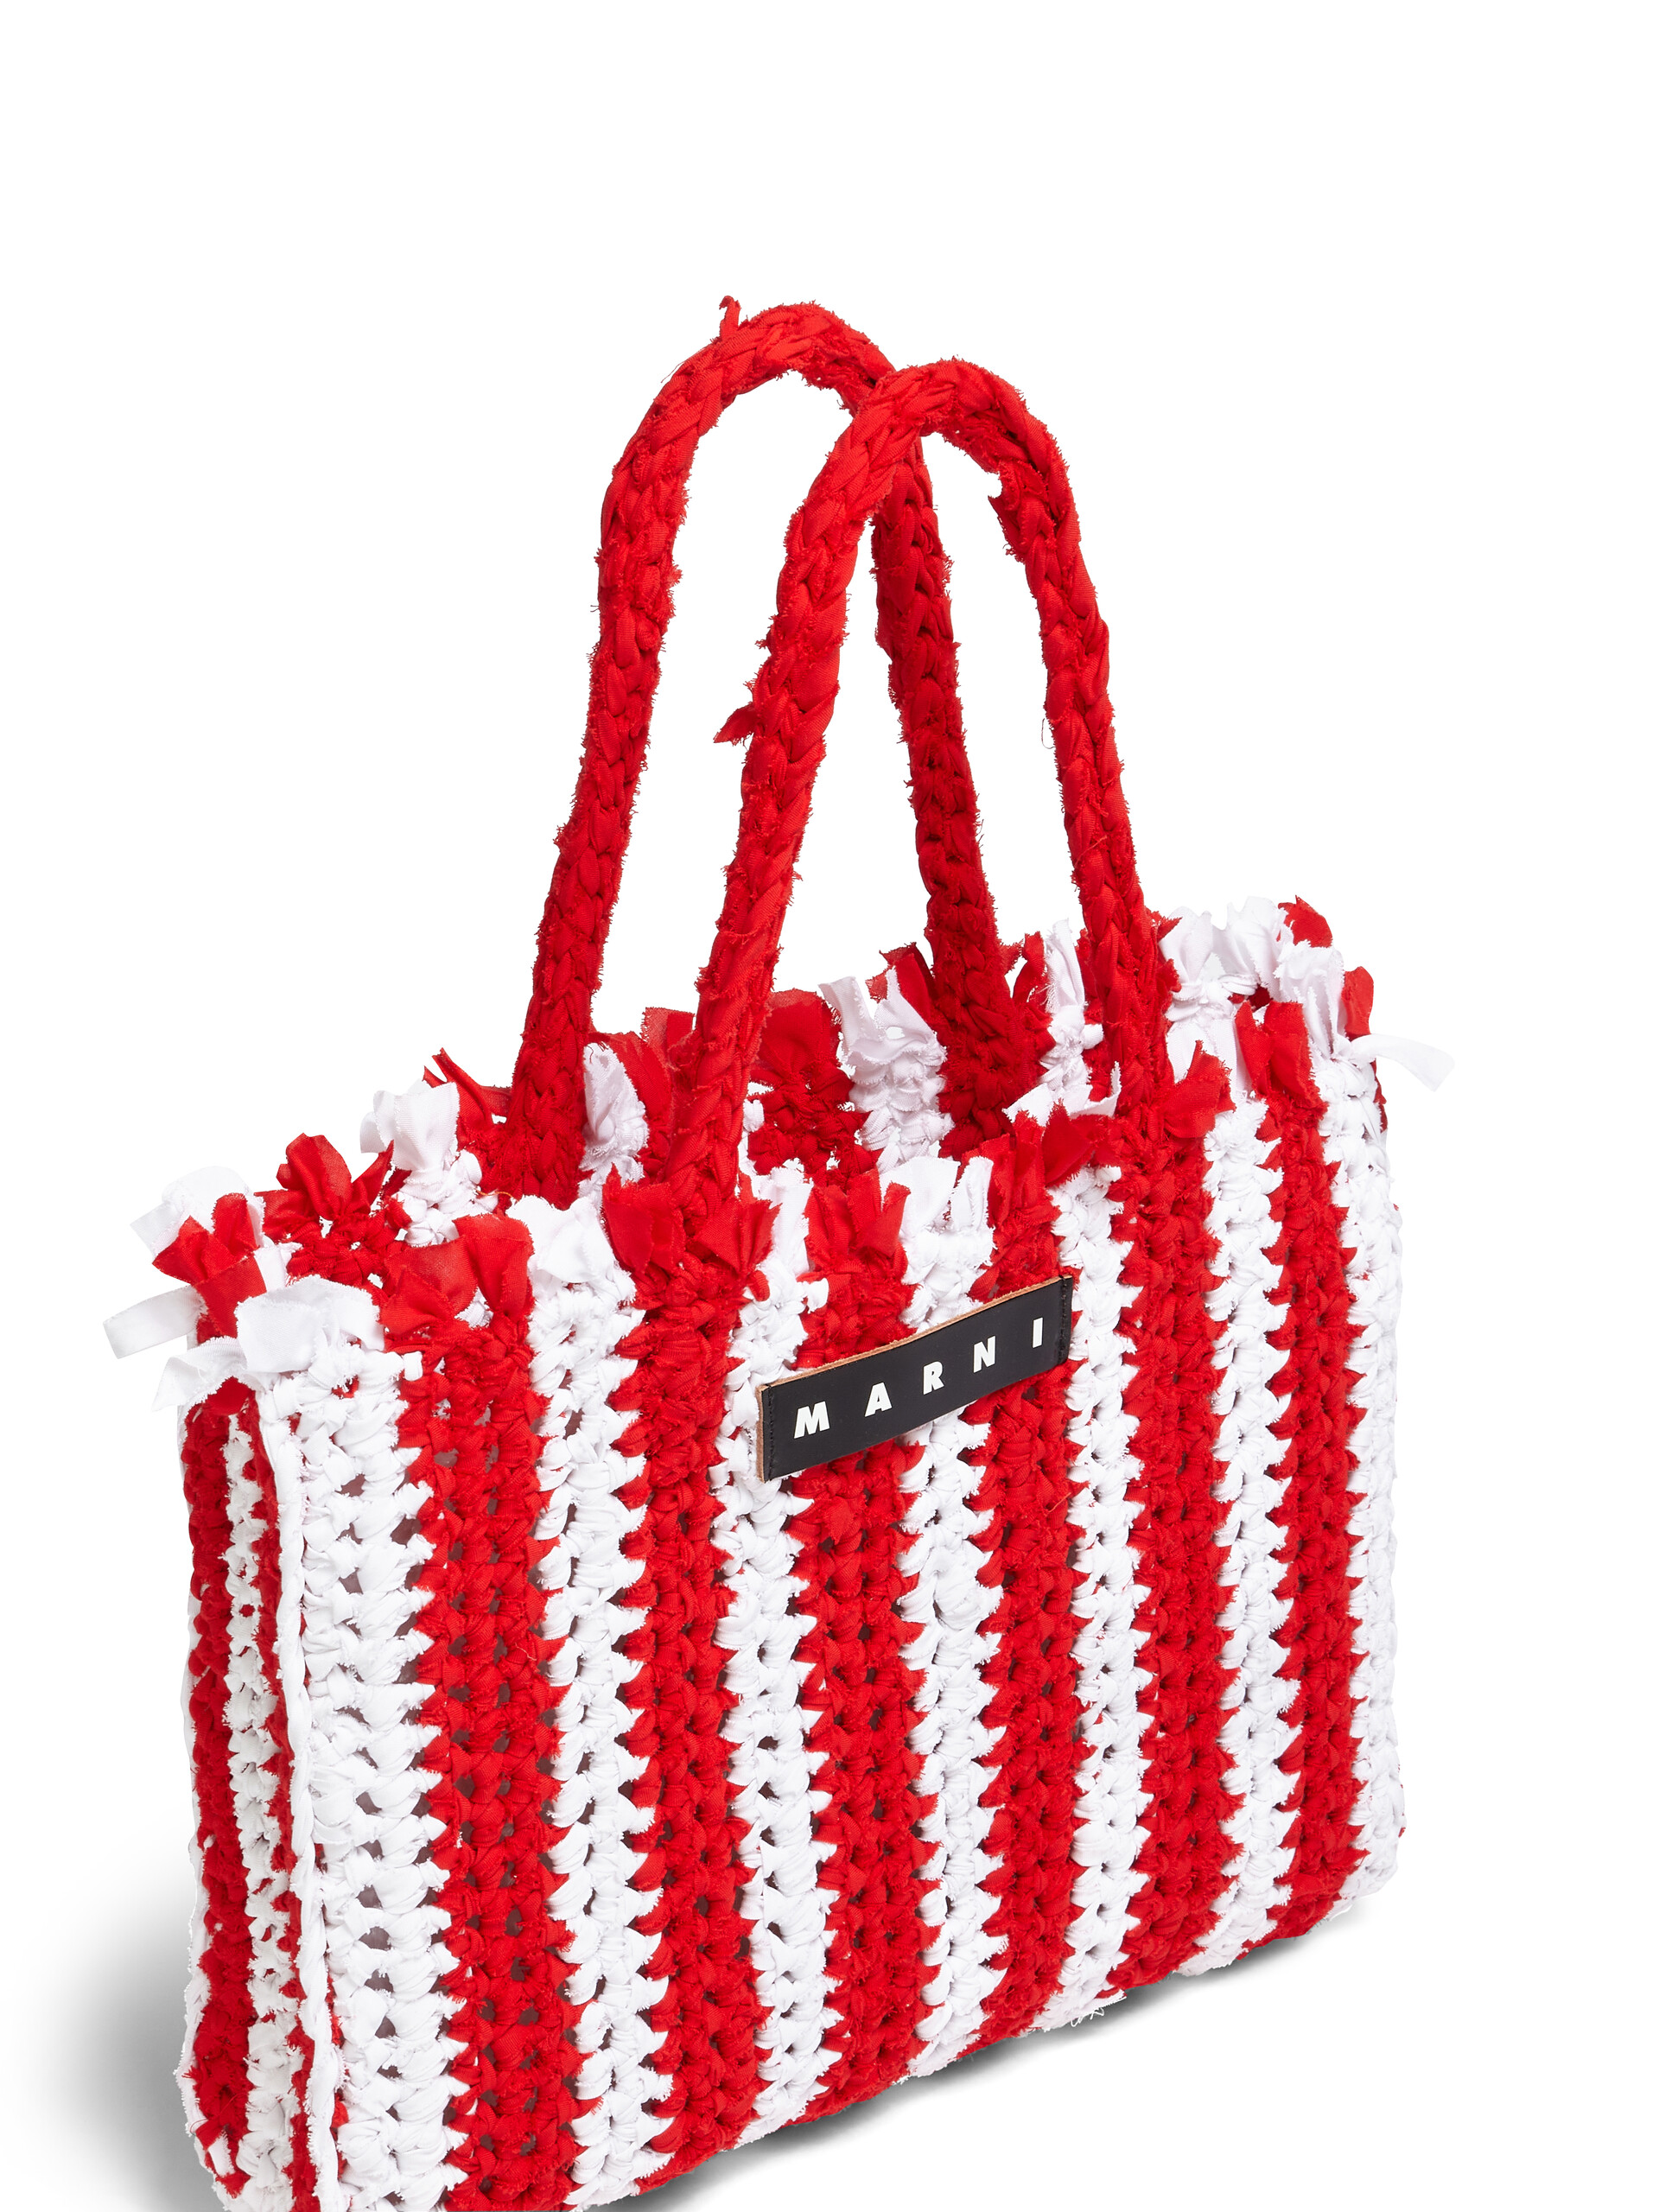 MARNI MARKET bag in white and red cotton - Bags - Image 4